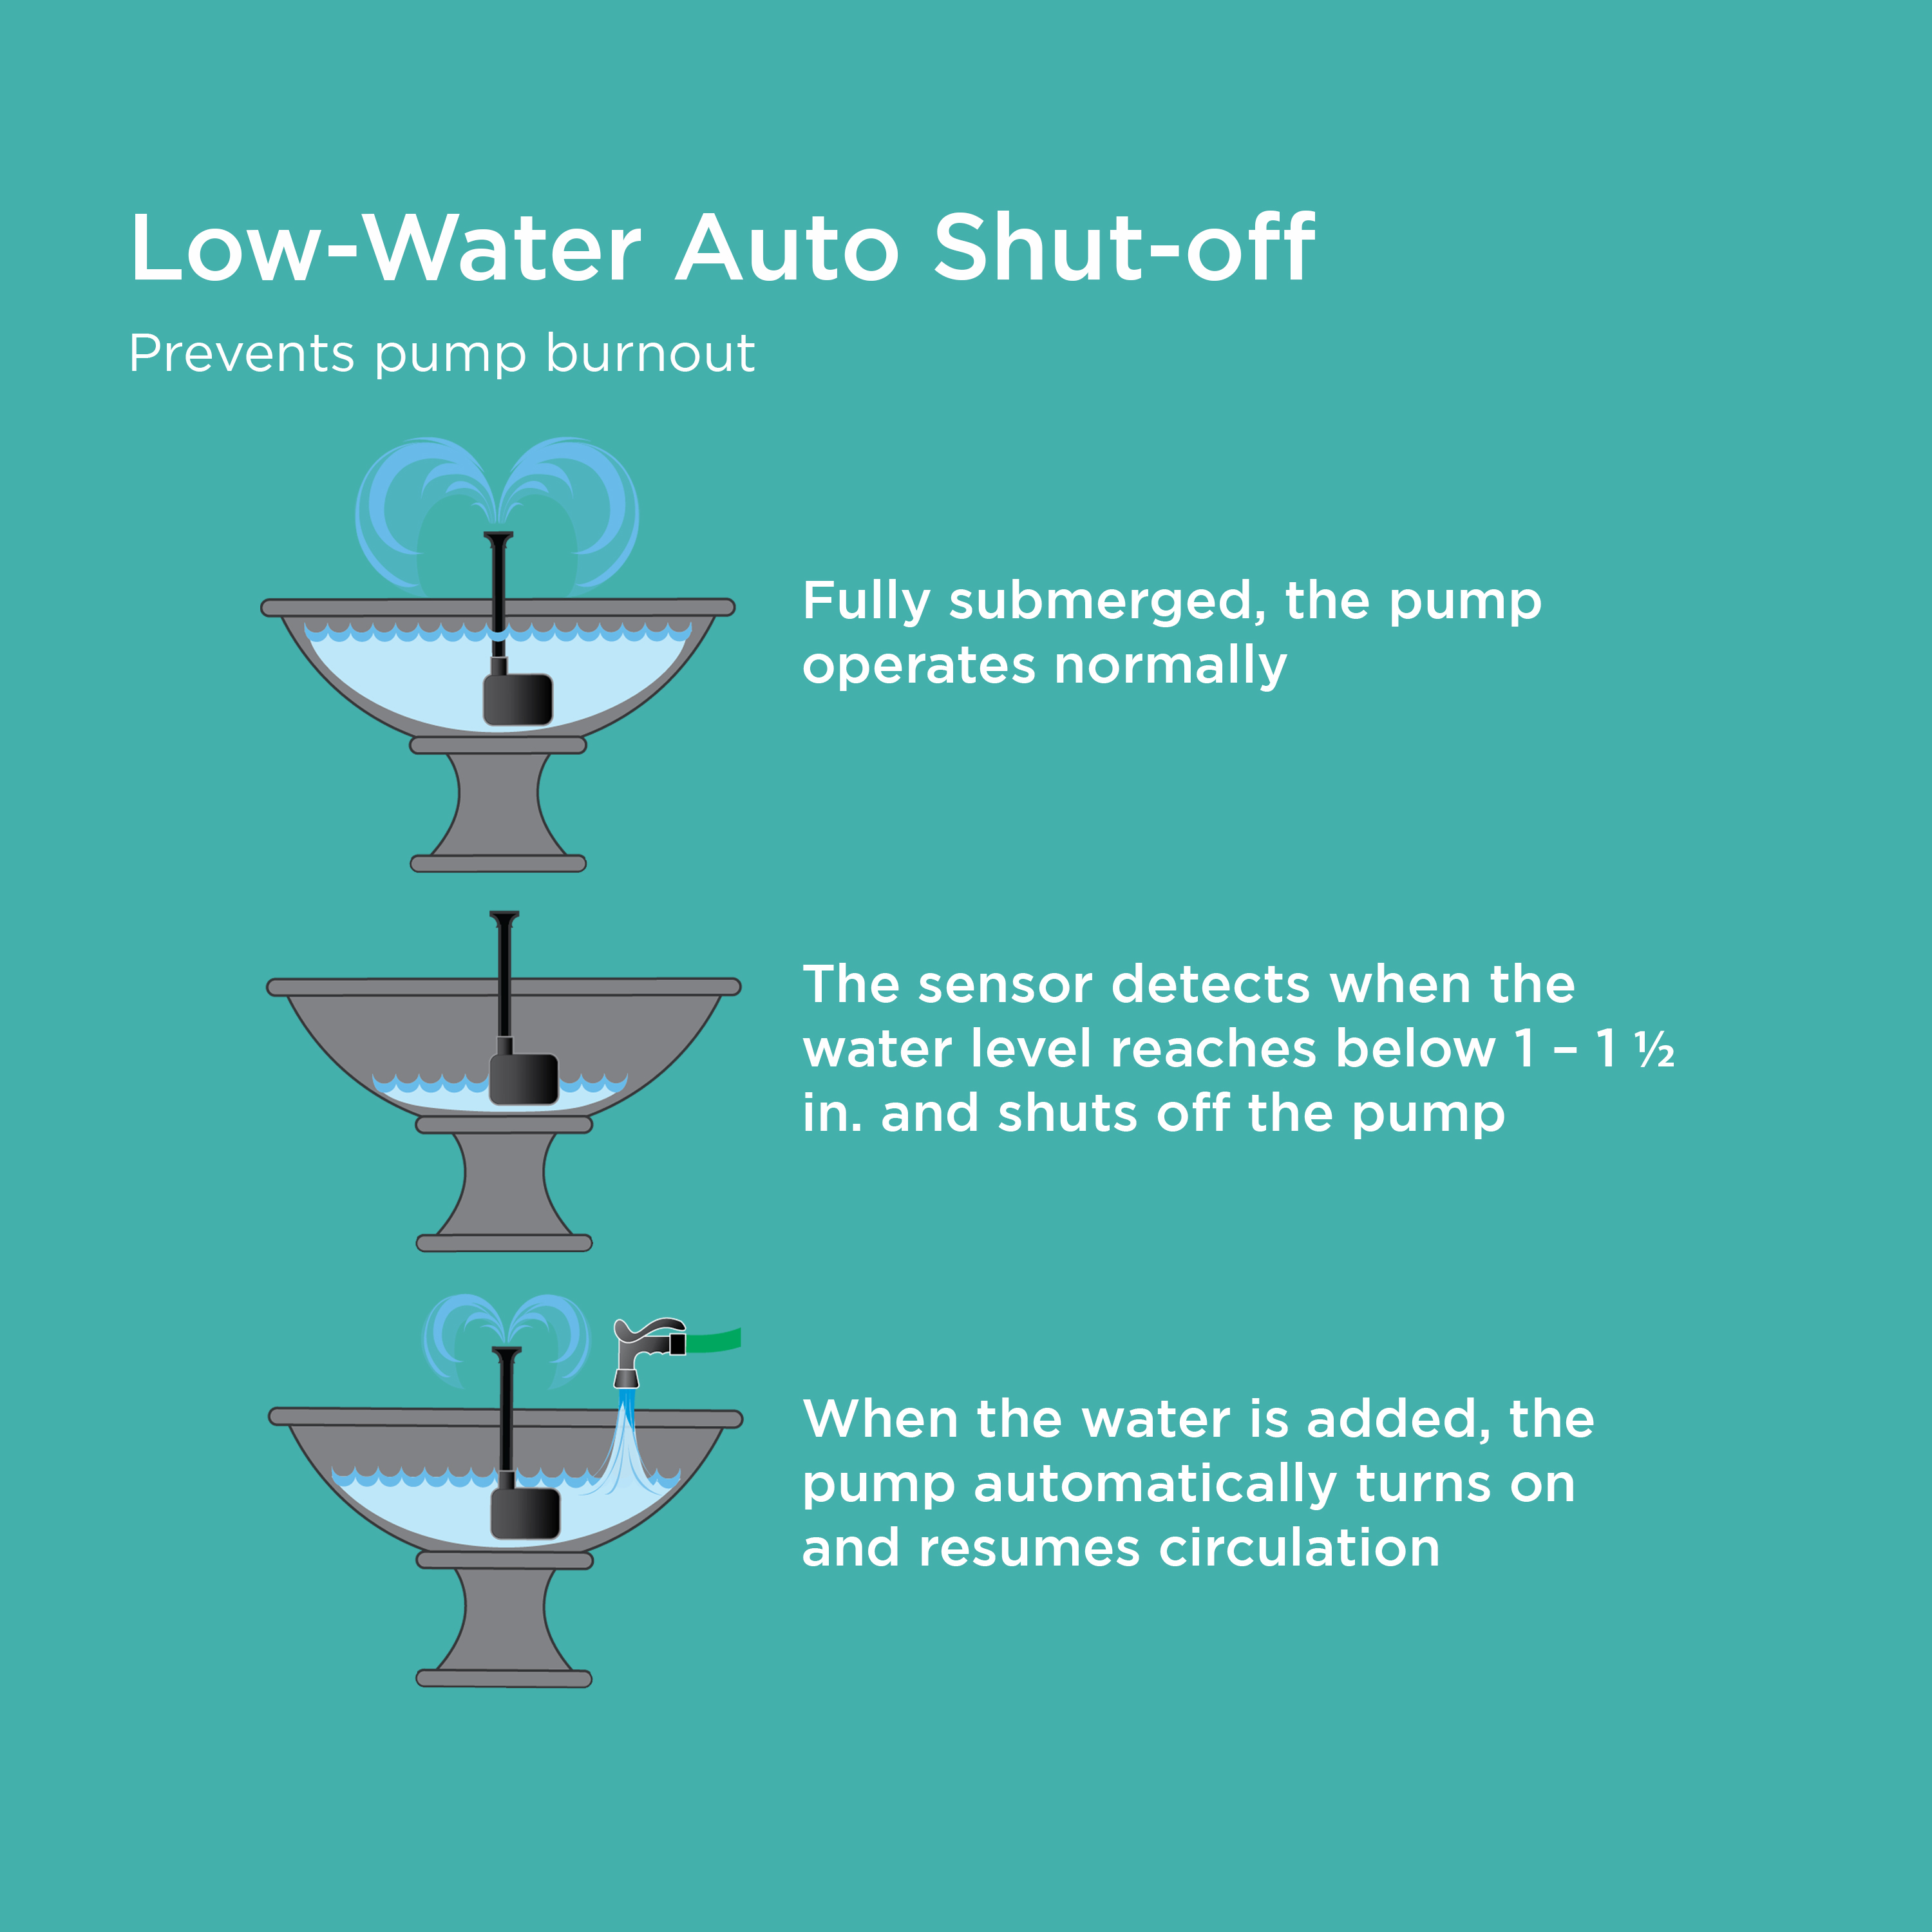 how low water auto shut-off feature works